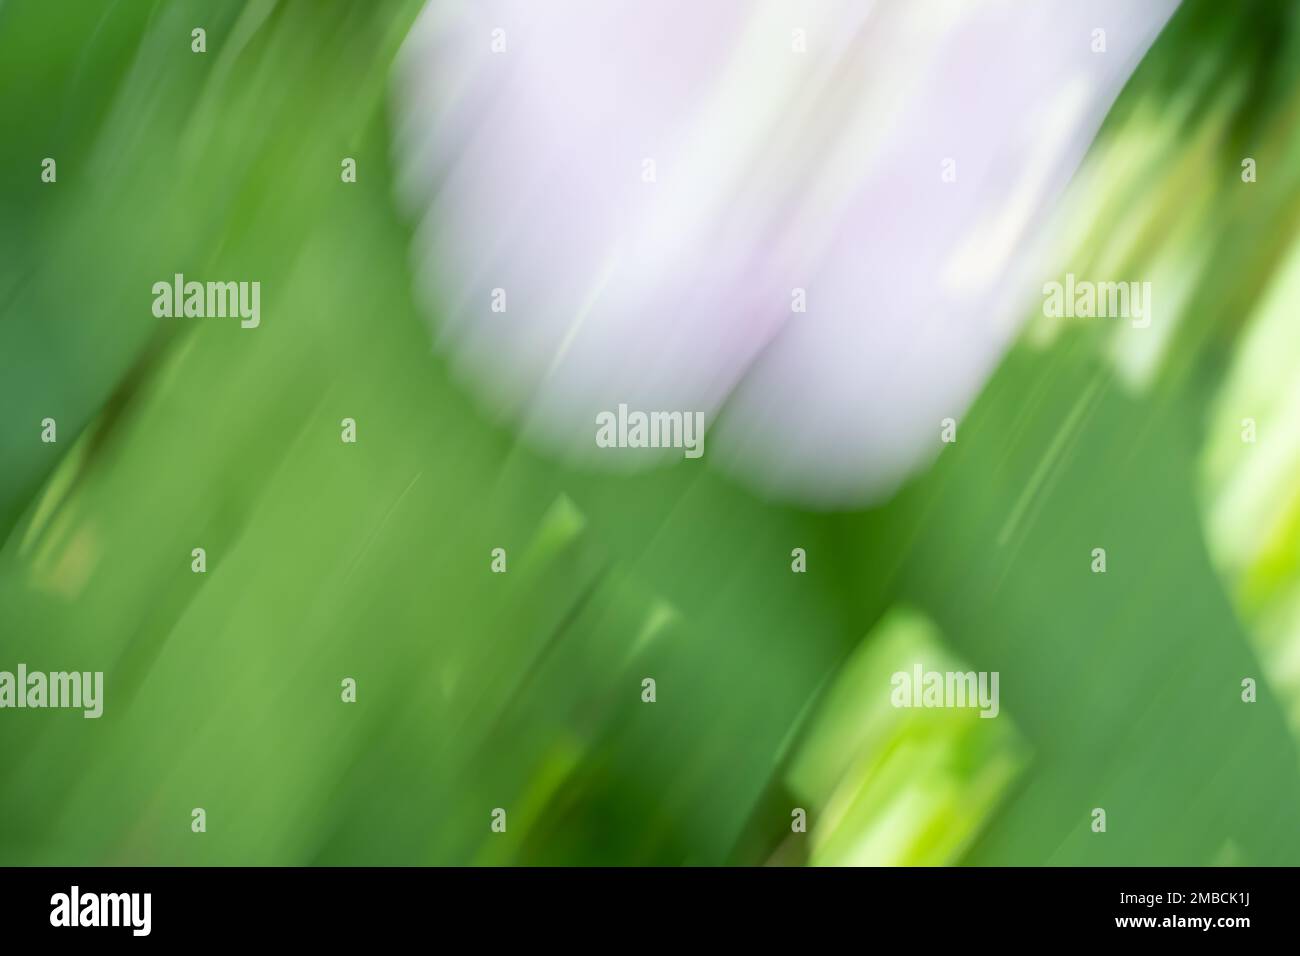 Morning glory impressionist abstract background blues and green Stock Photo